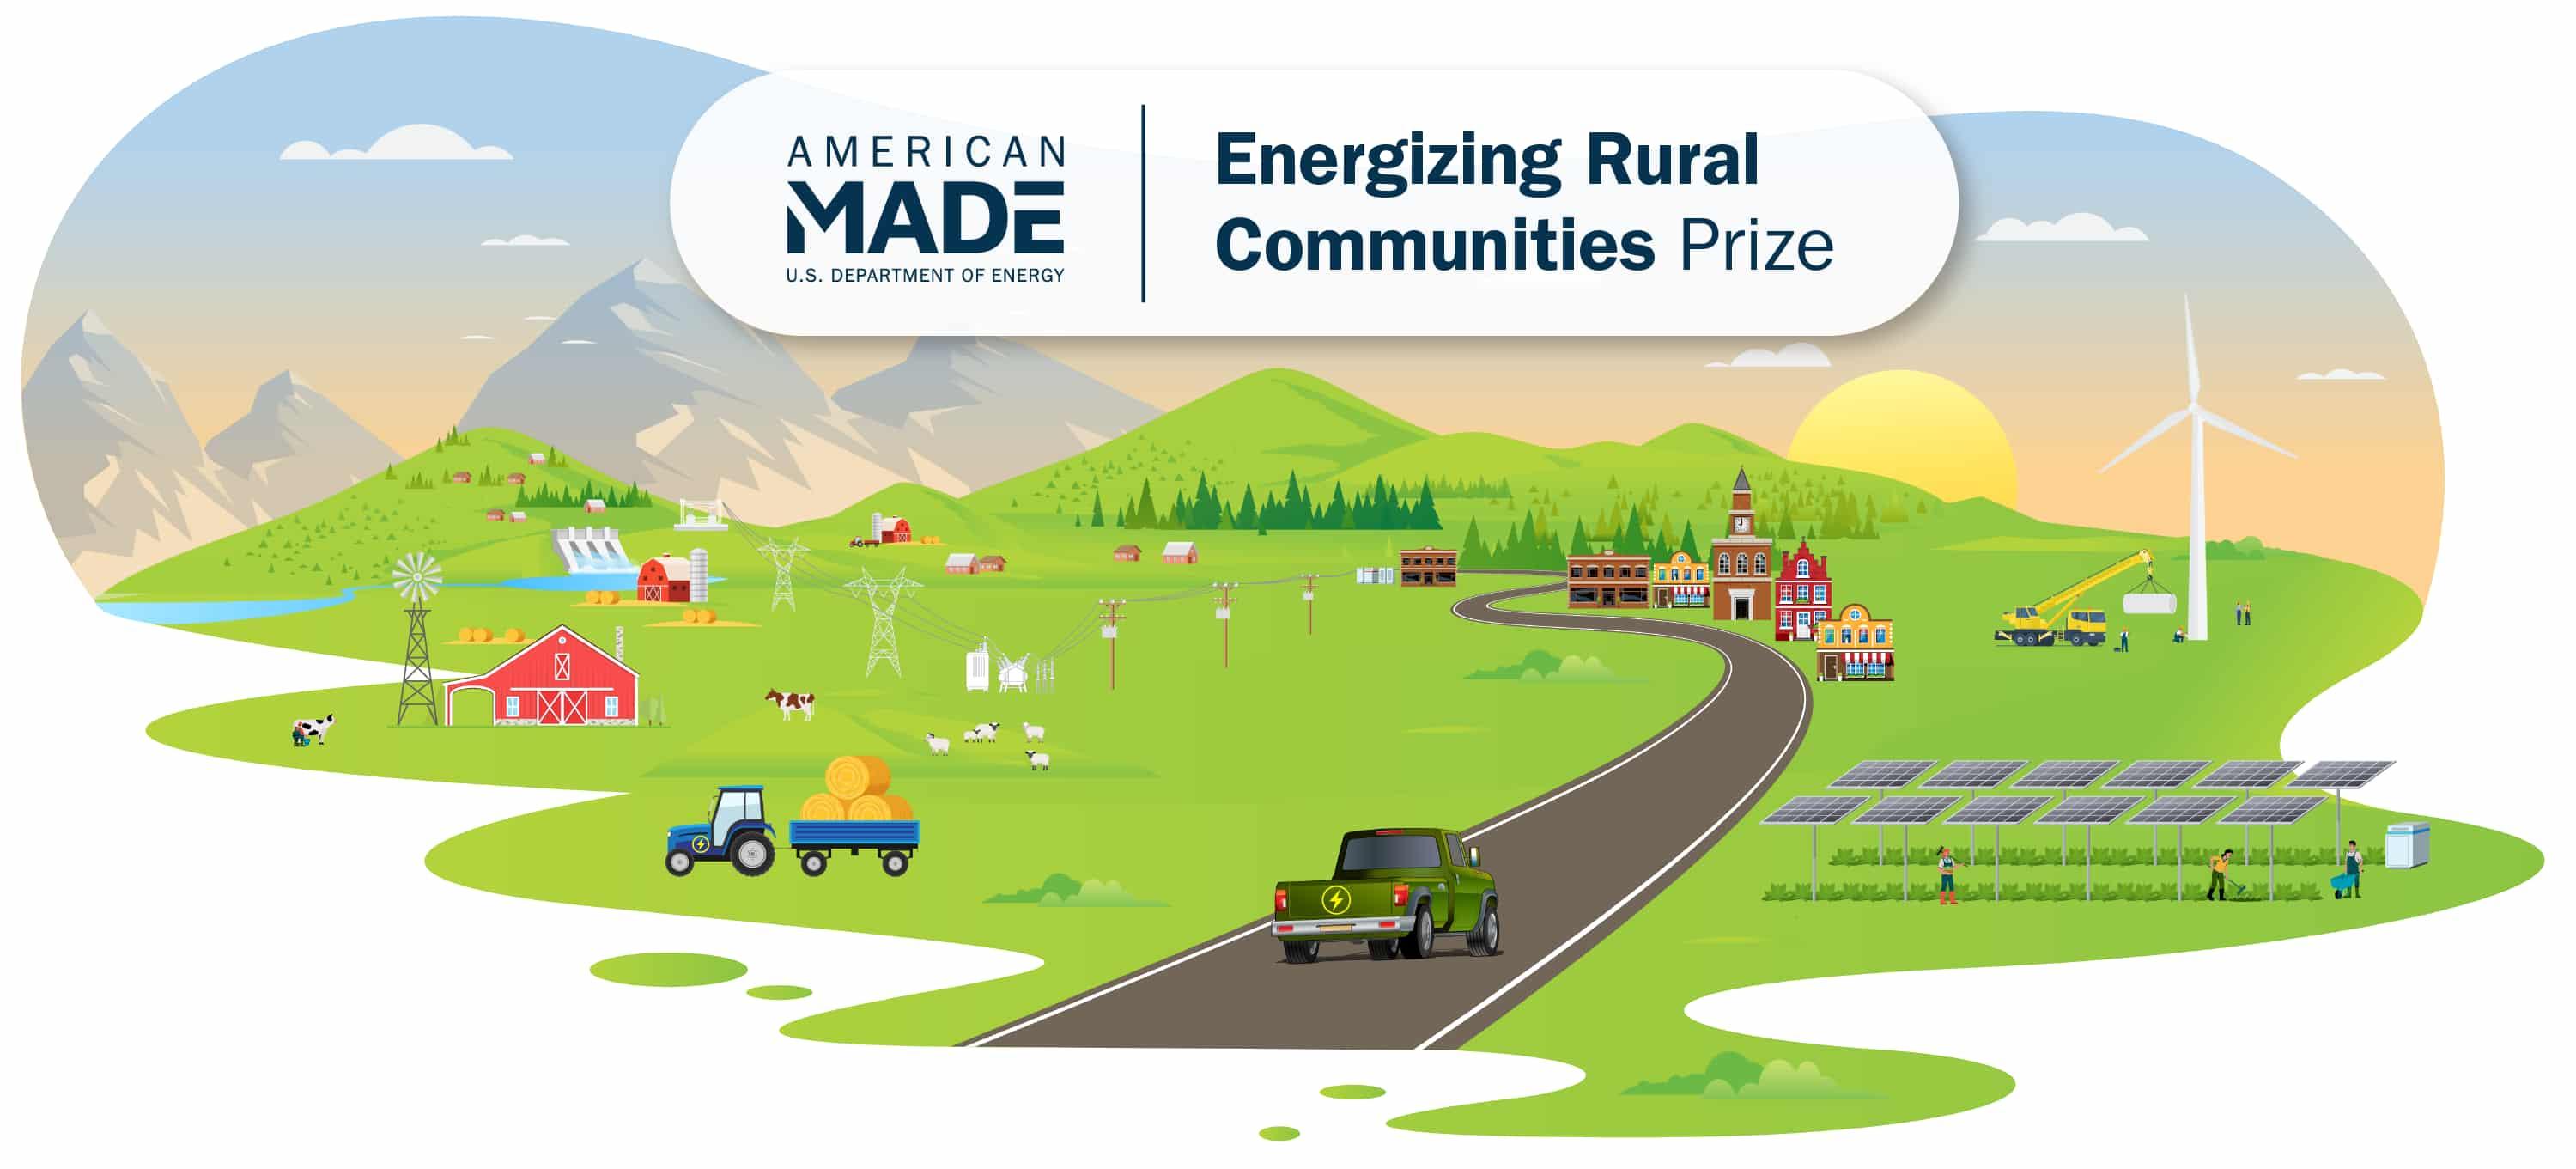 a cartoon illustration of a rural community powered by renewable energy. Text that says American-Made Challenges, and Rural Energy Prize